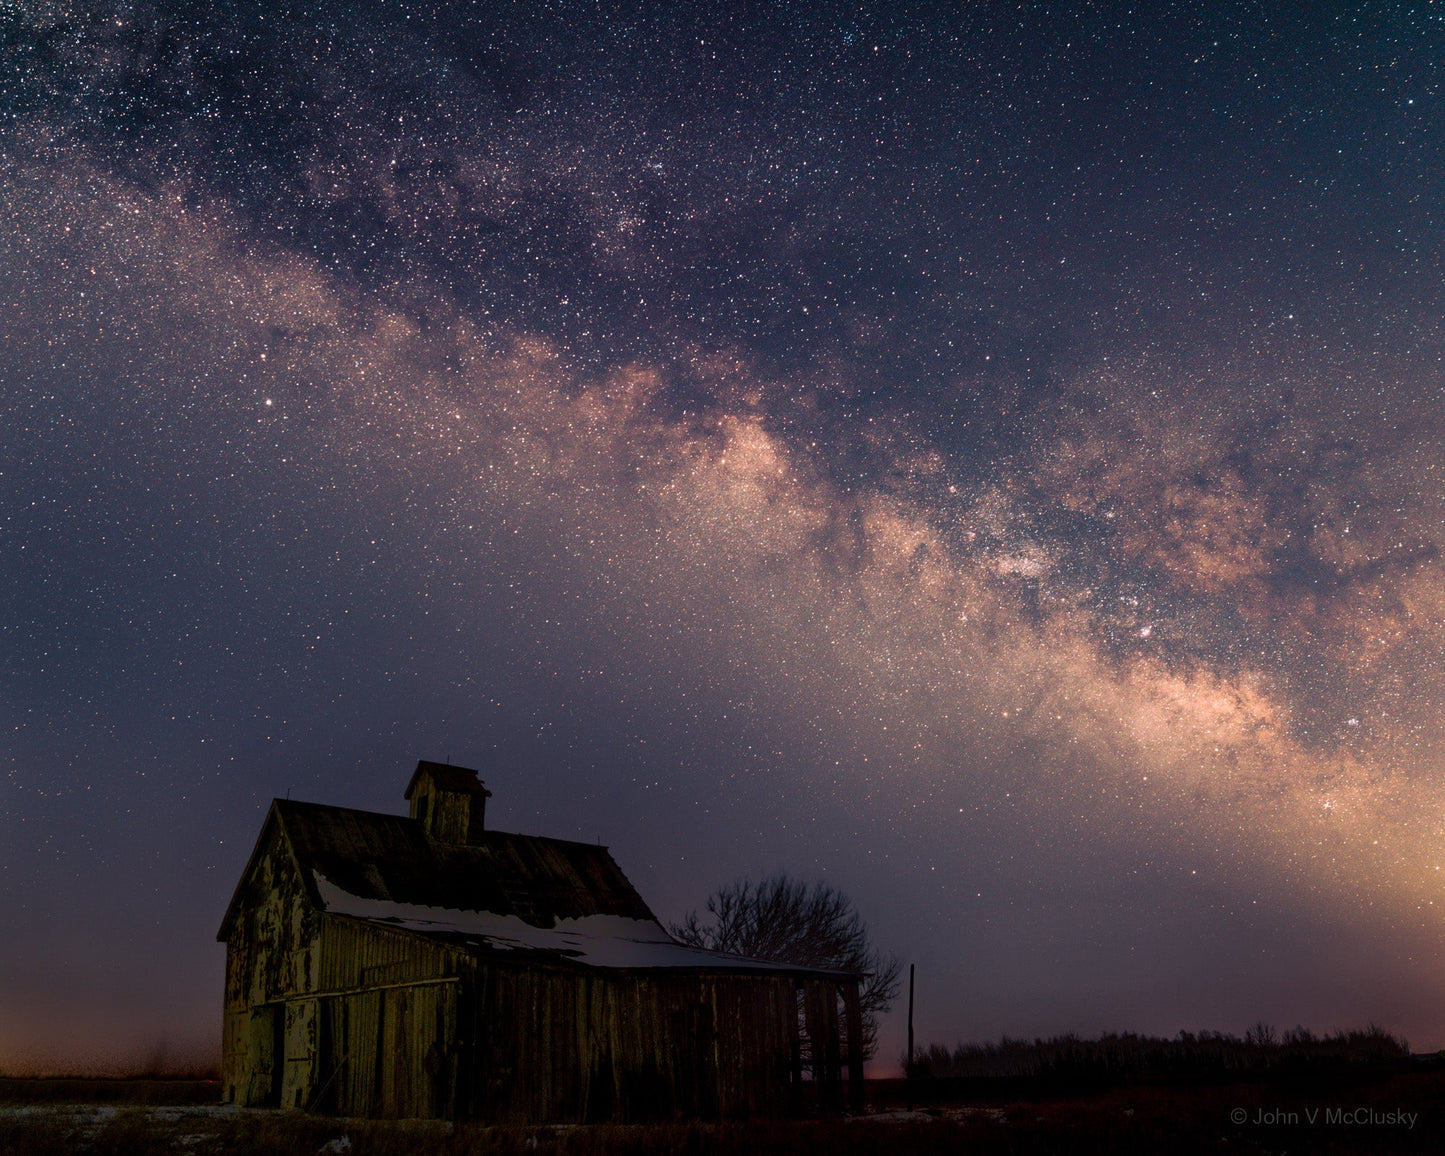 Barn and Milky Way: Fine Art Landscape Photography